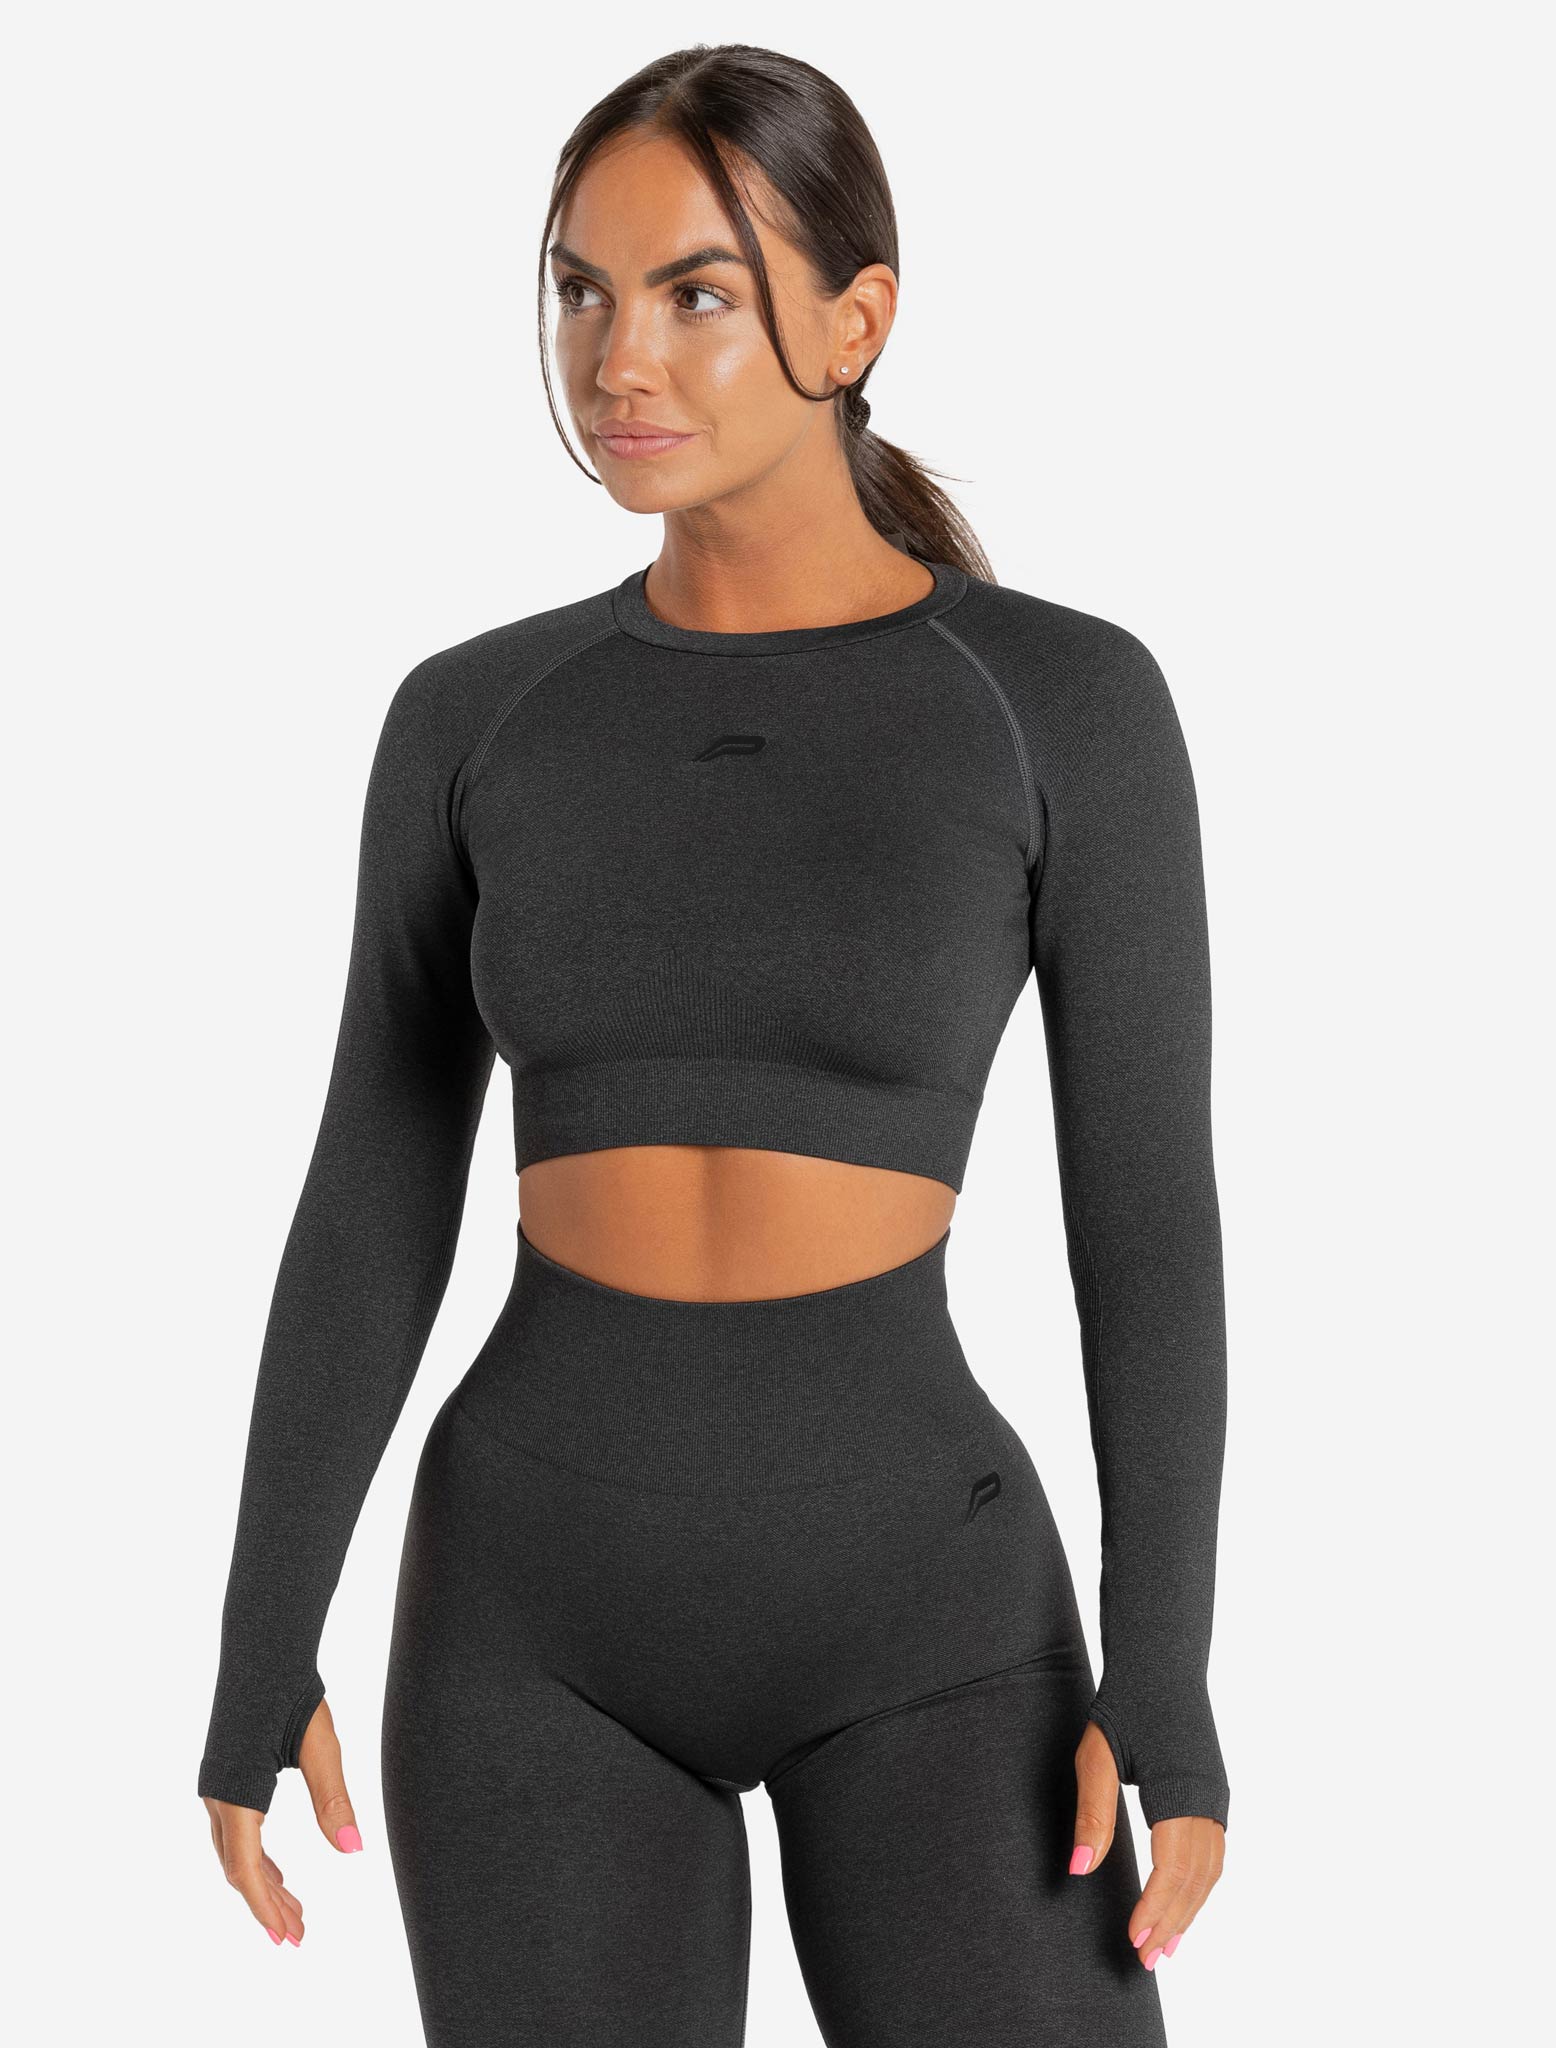 FREEYE Womens Seamless Long Sleeve Workout Crop Tops with Thumb